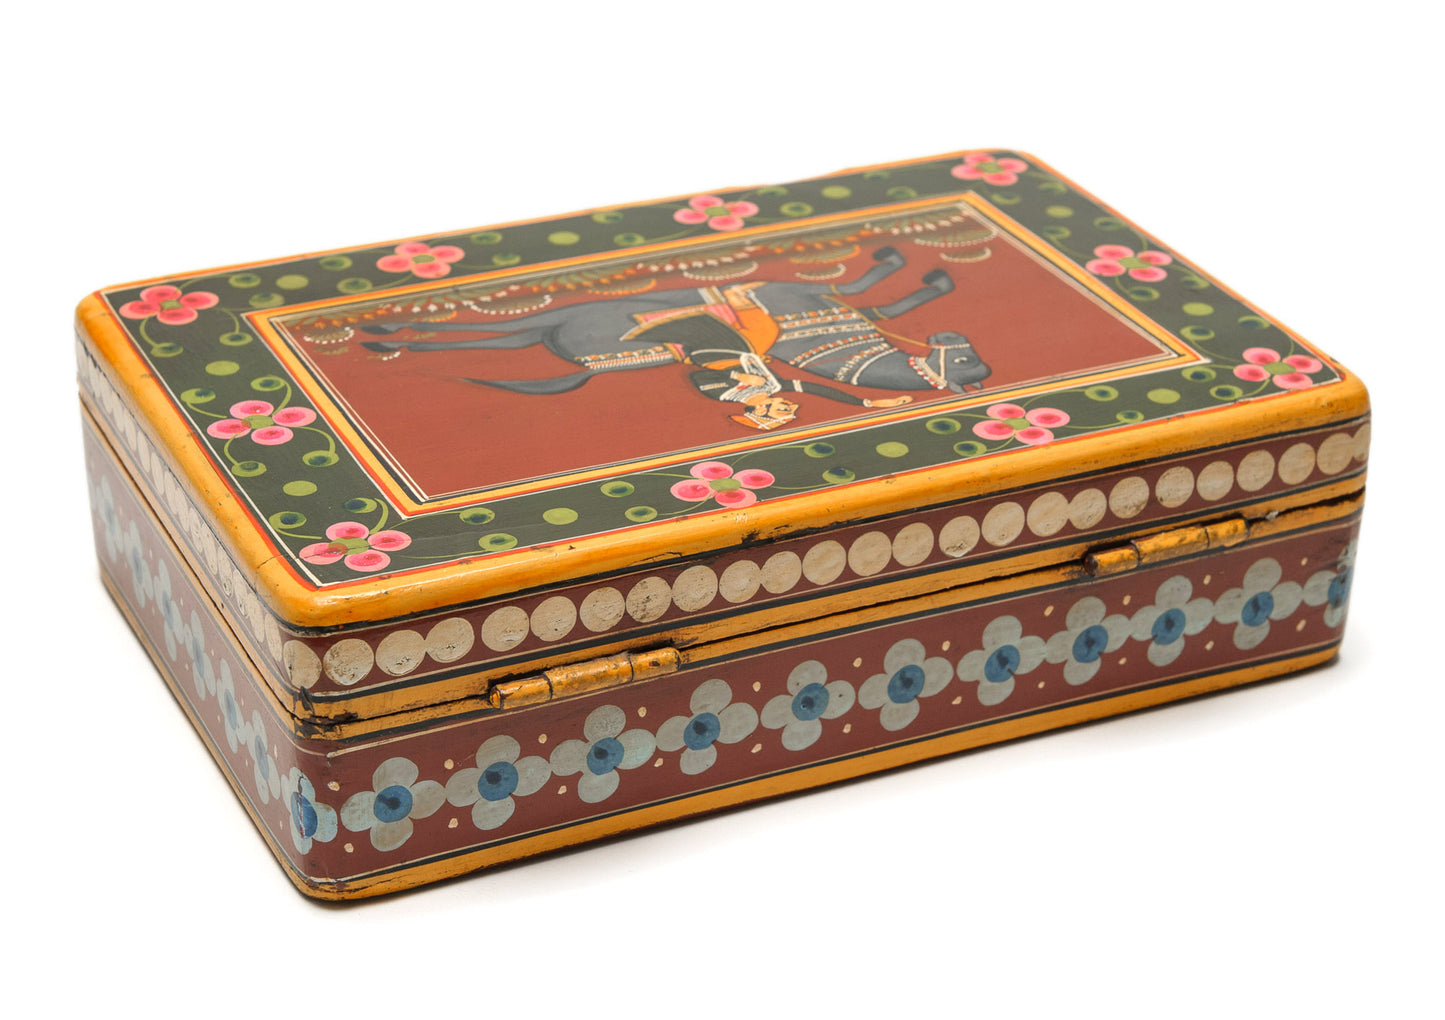 Interesting Antique Middle Eastern Hand Painted Horse & Figure Art/Writing/Cosmetic Box (Code 1009)